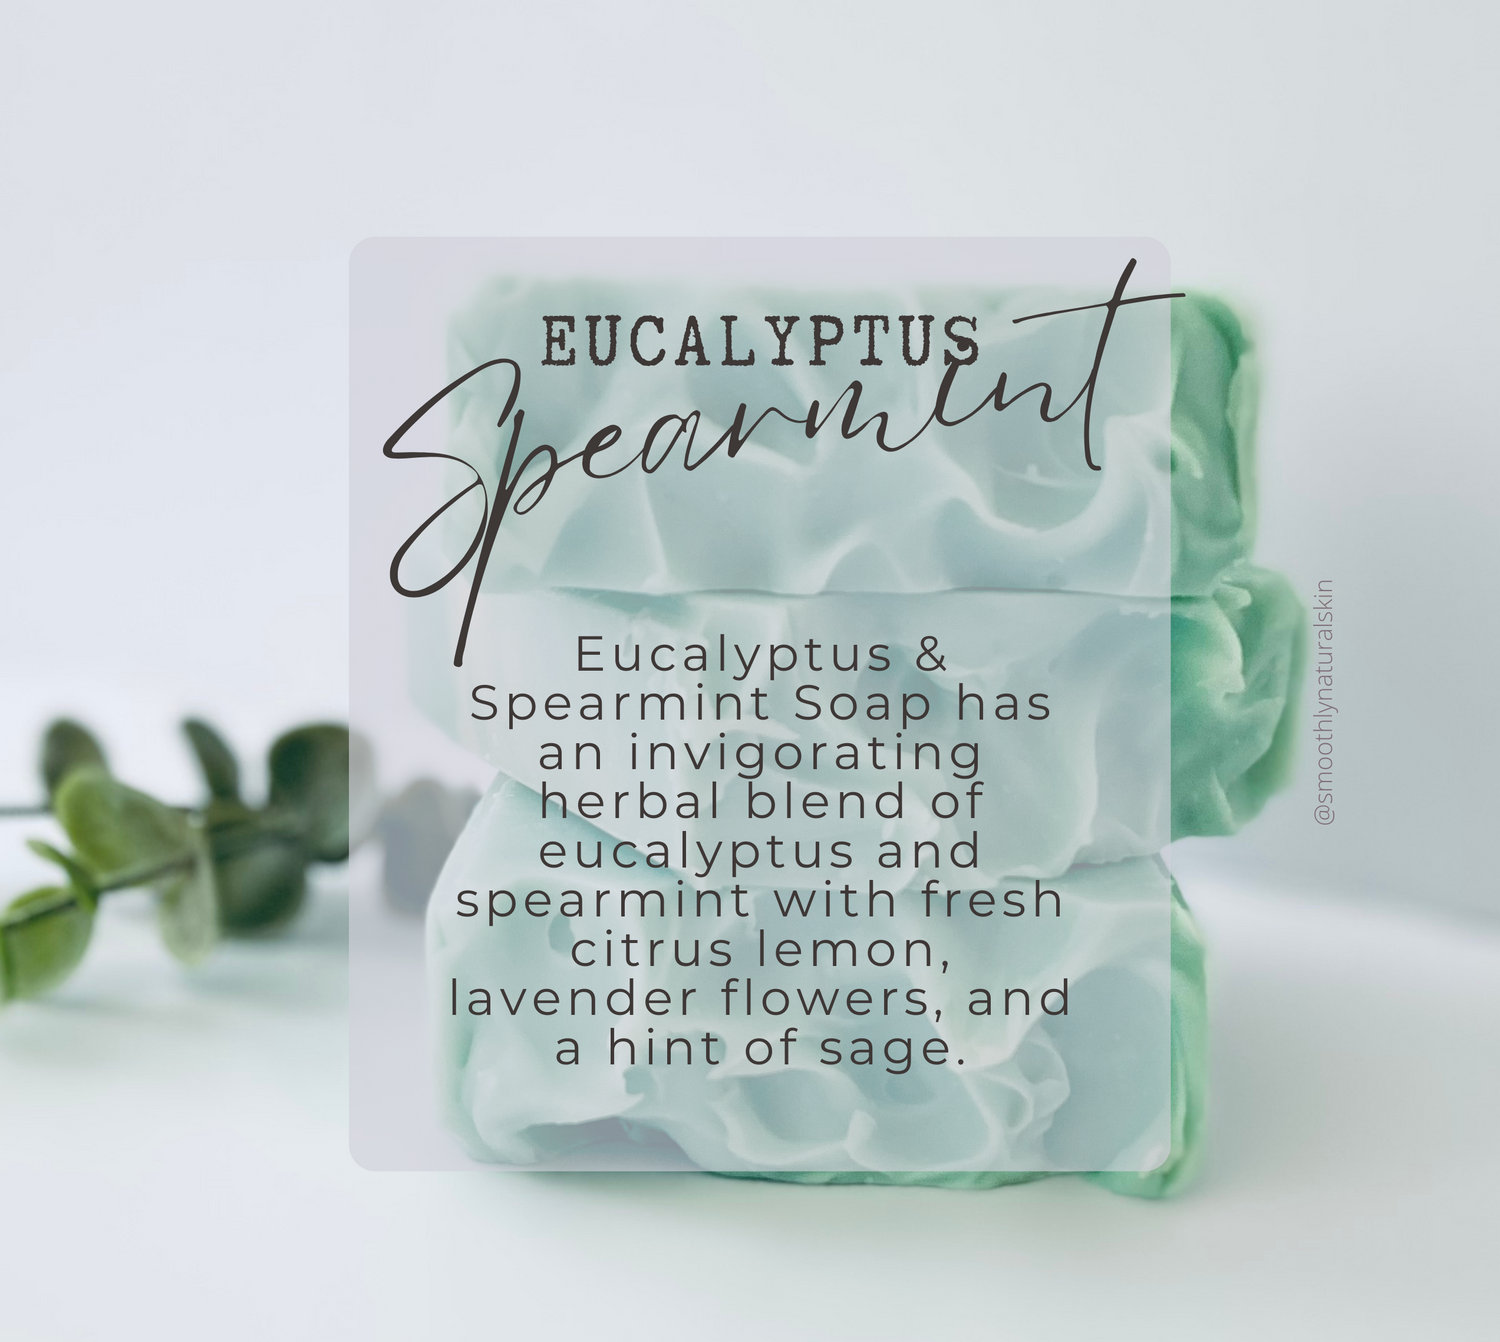 Eucalyptus & Spearmint Soap has an invigorating herbal blend of eucalyptus and spearmint with fresh citrus lemon, lavender flowers, and a hint of sage.